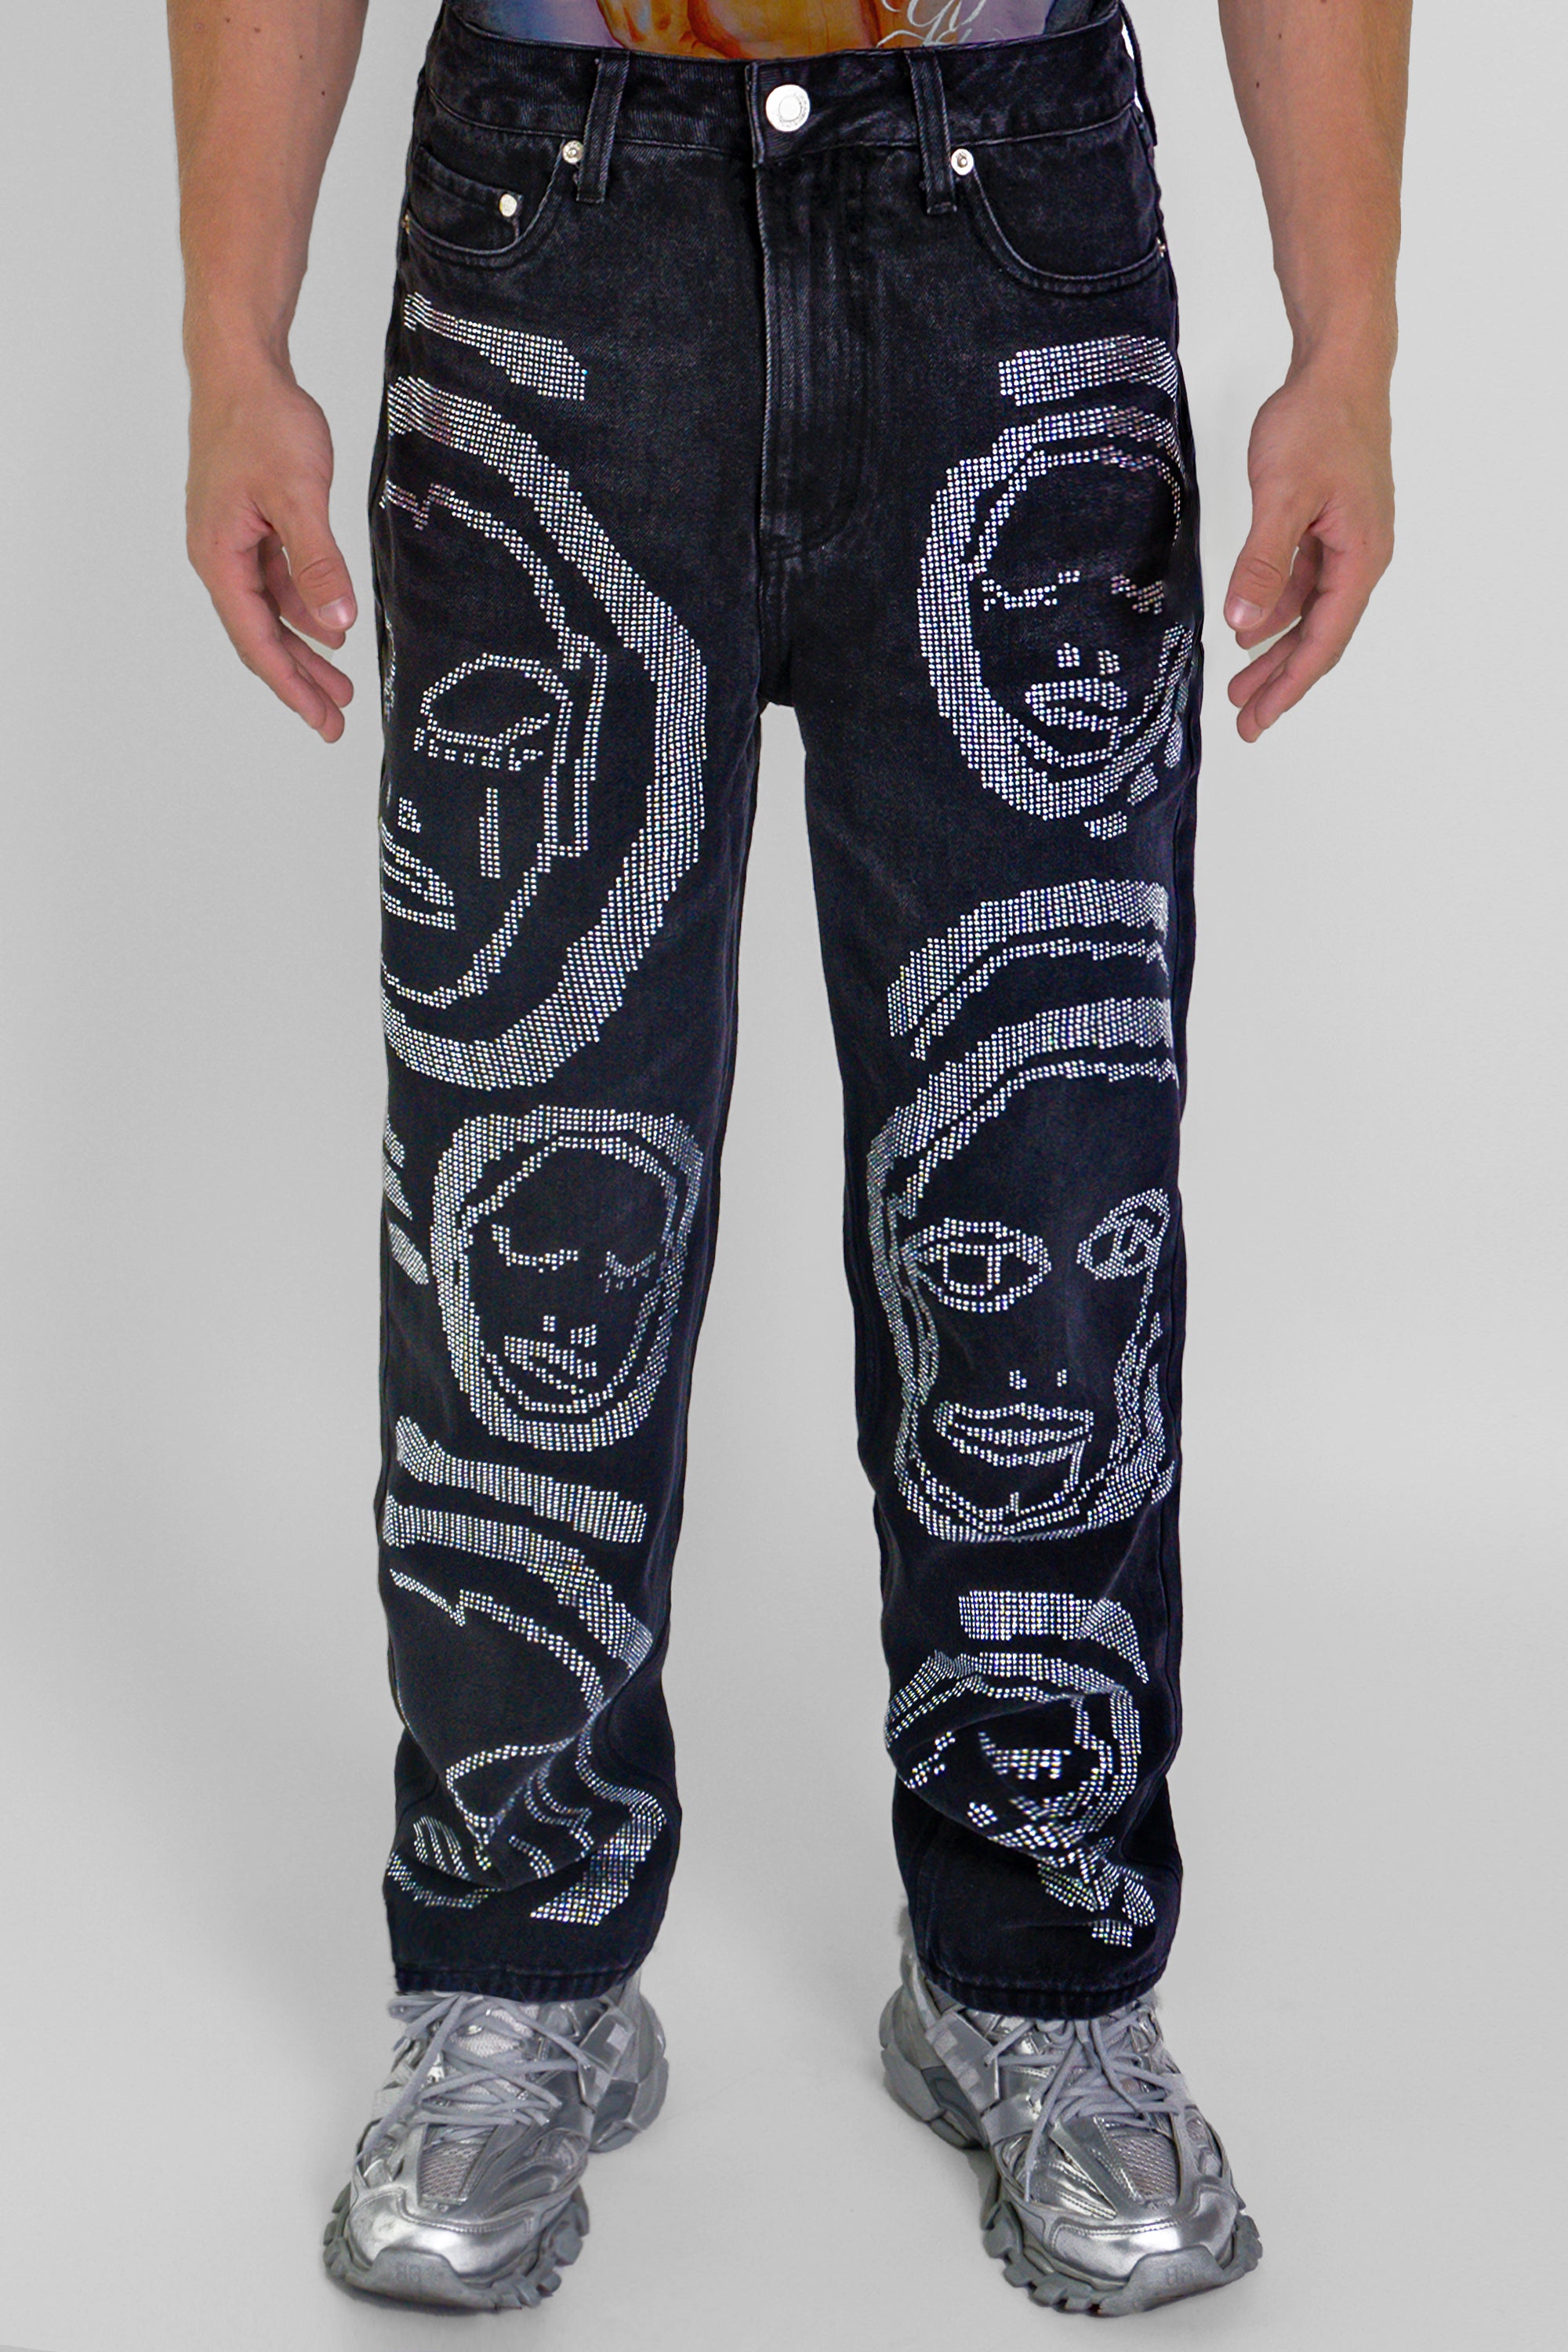 Rhinestone' All Over You' Jeans - Patrick Church